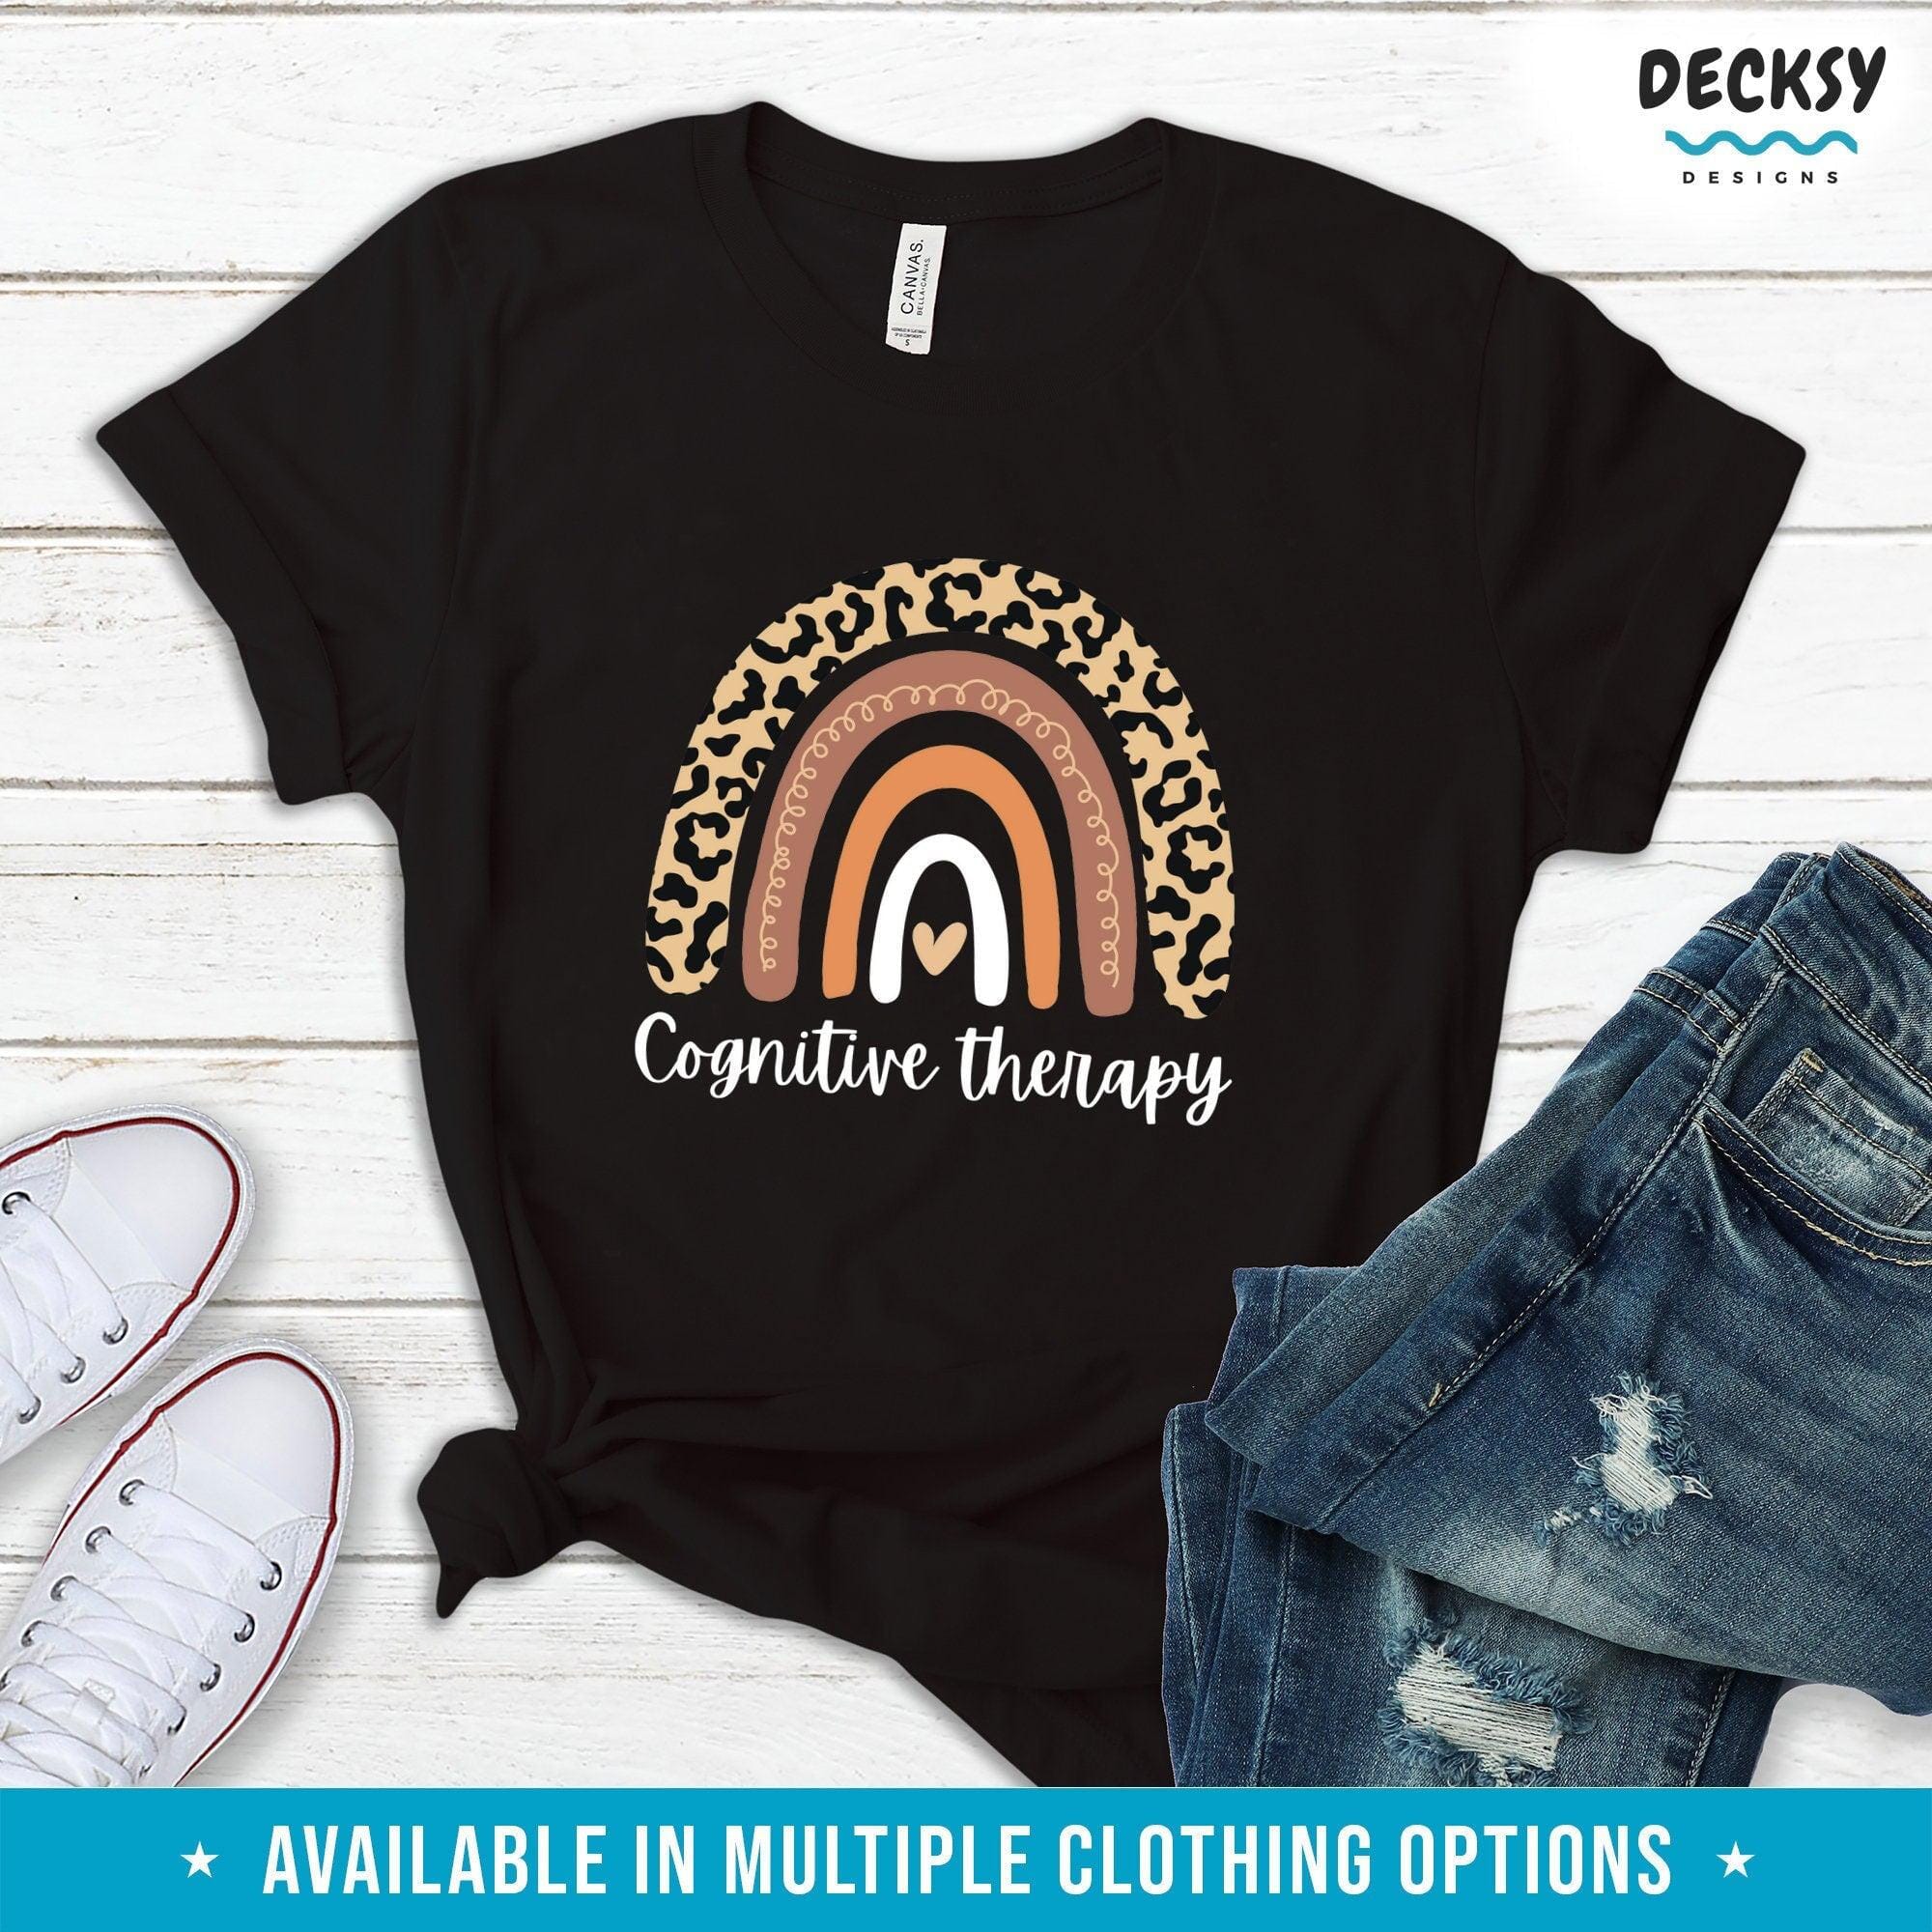 Cognitive Therapy Shirt Gift, Future Therapist Tee-Clothing:Gender-Neutral Adult Clothing:Tops & Tees:T-shirts:Graphic Tees-DecksyDesigns